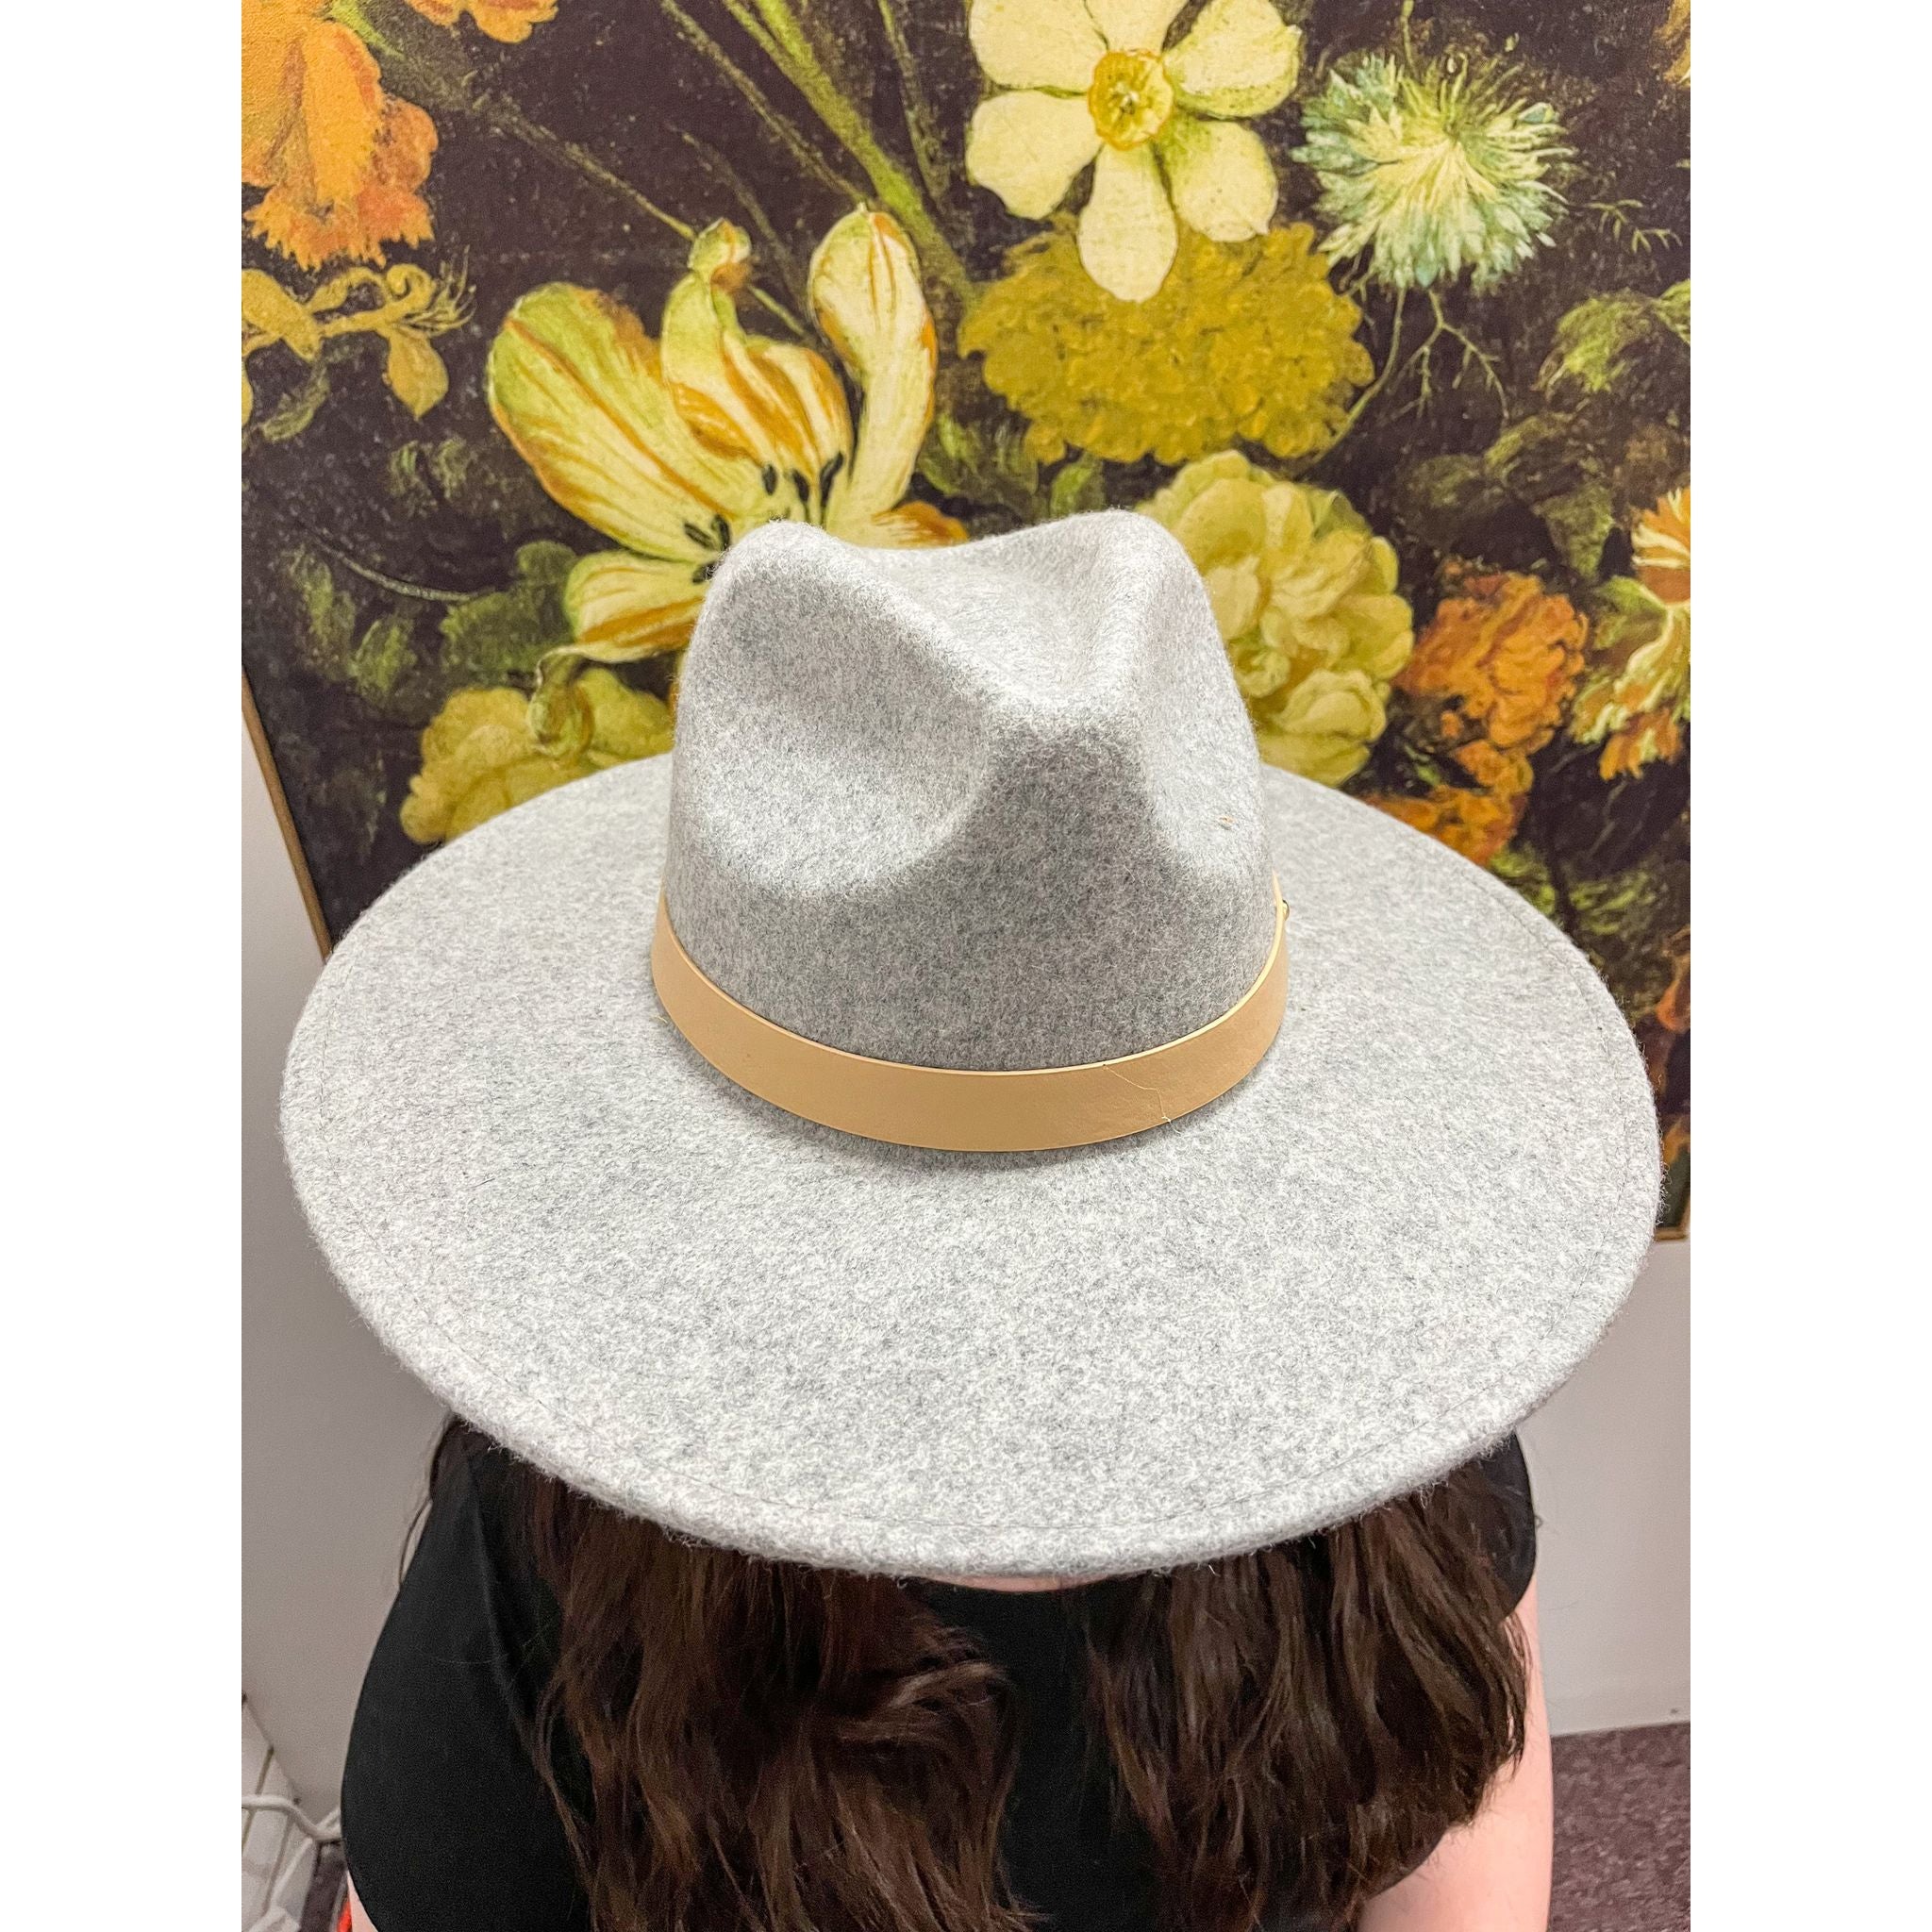 Front View of Grey Felt Hat - Miles and Bishop